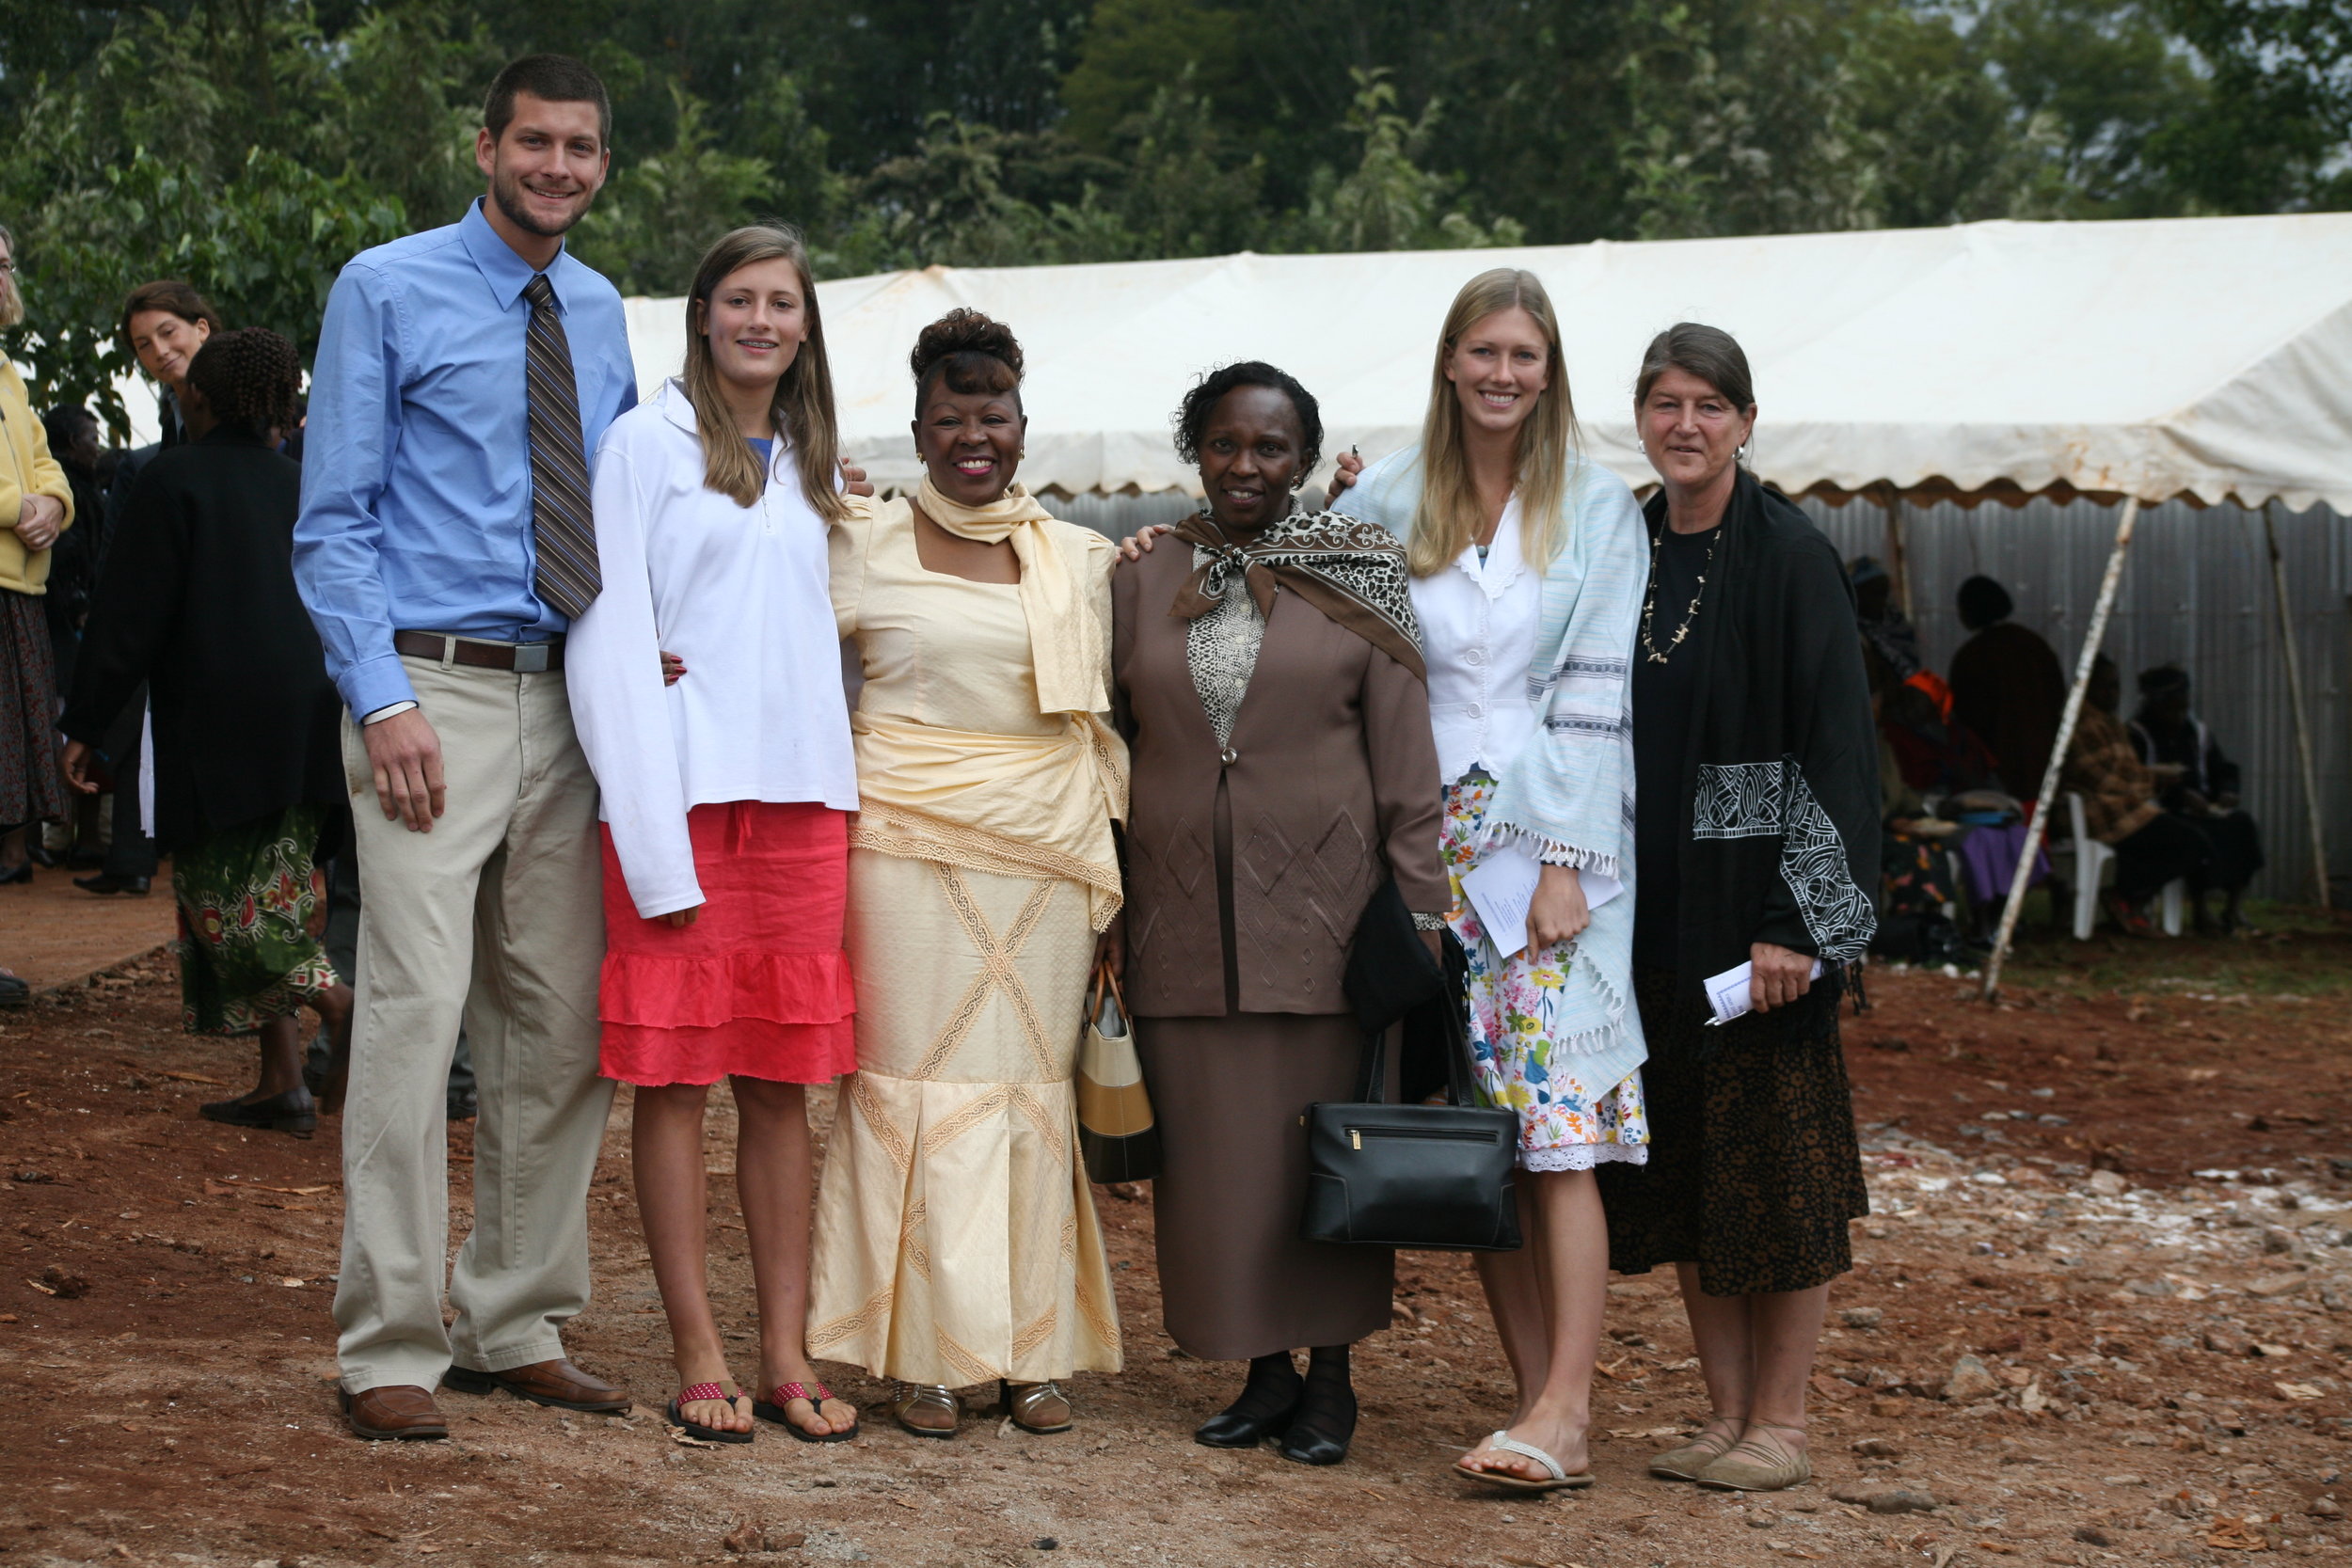  Hannah, Geneva, their family, and hospital nurses on the groundbreaking day the Sugarbaker Memorial Clinic was opened.&nbsp; 